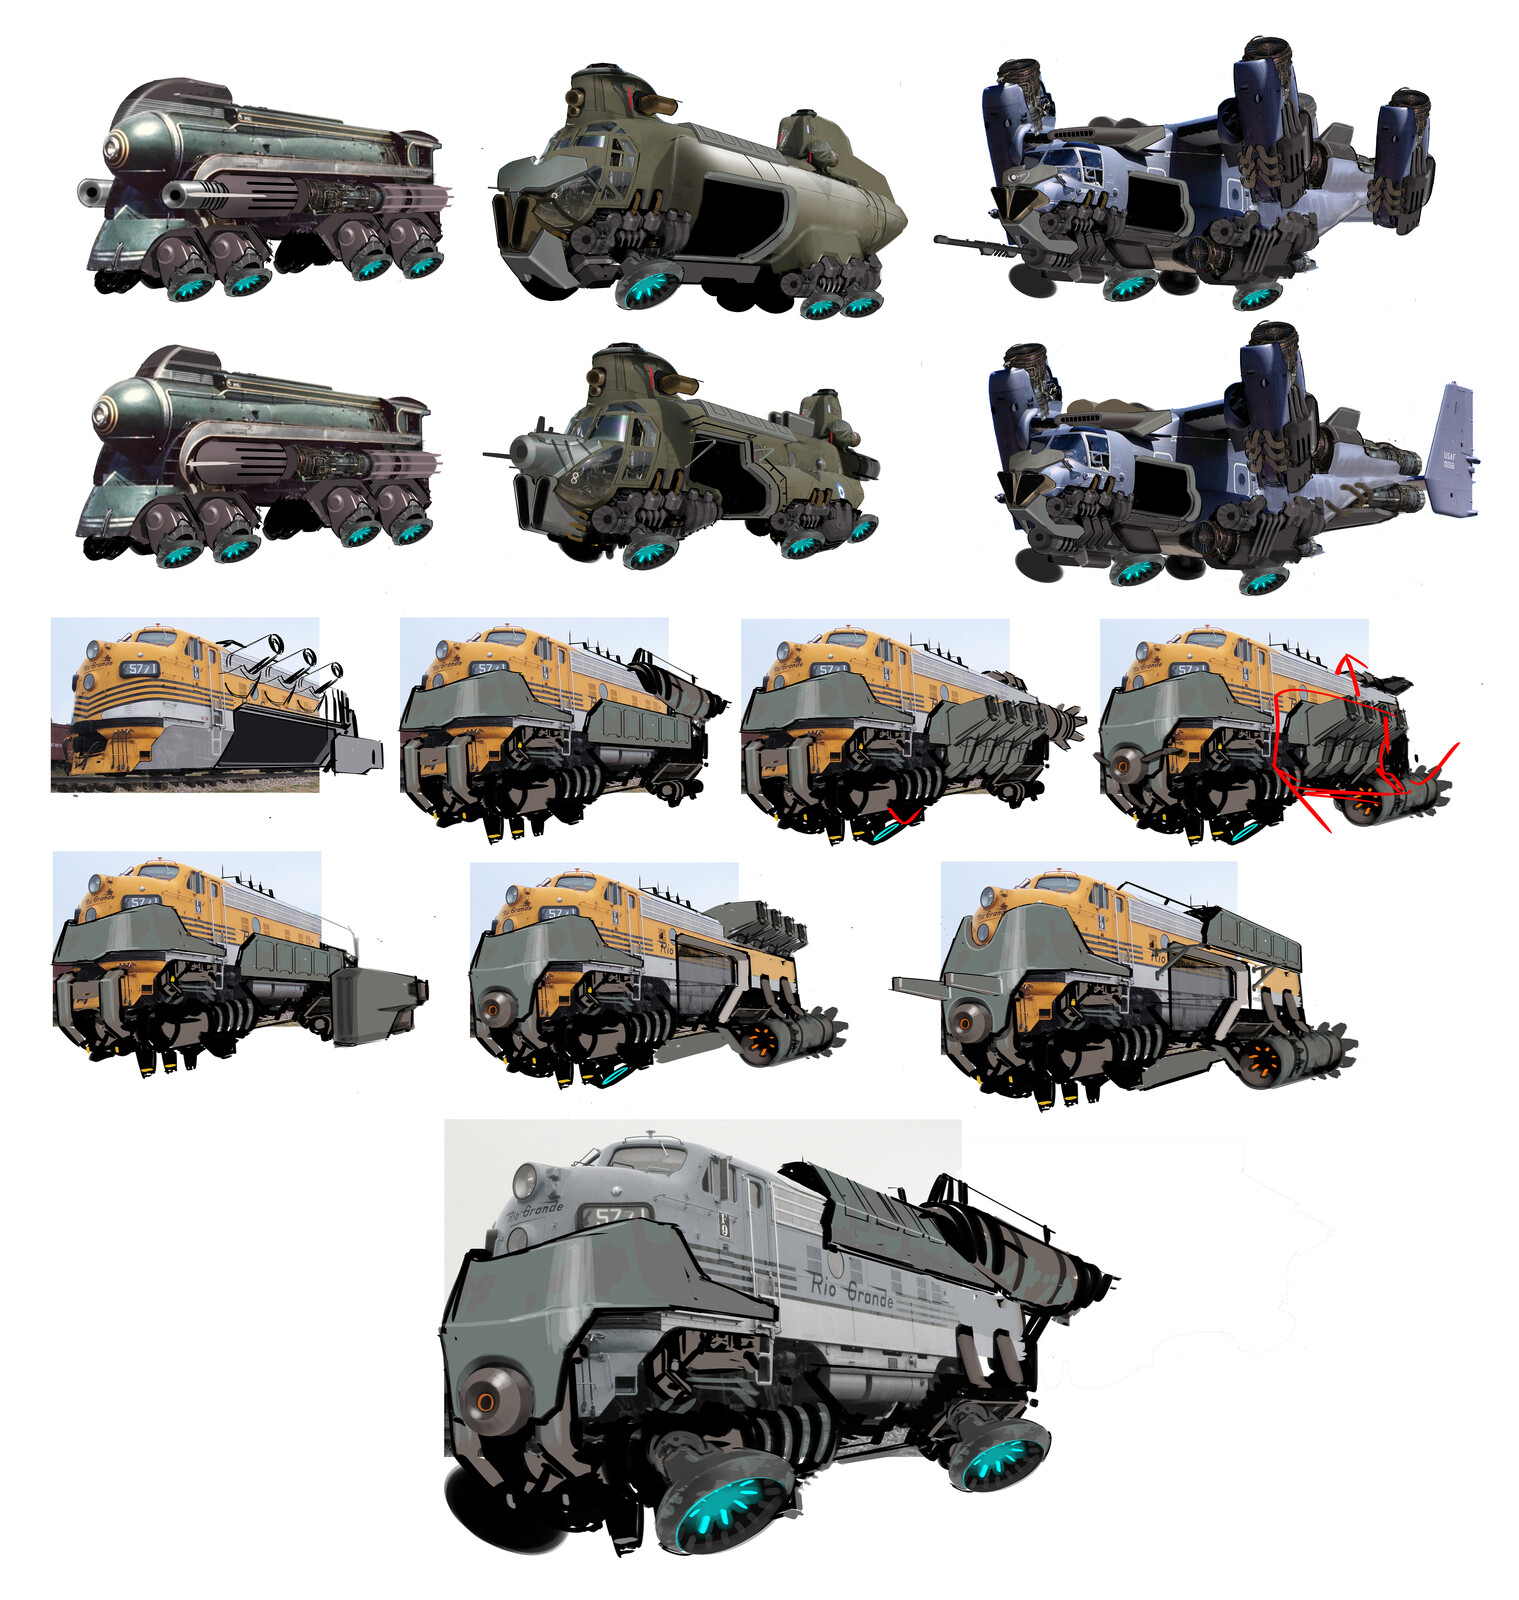 Dropship development.  My AD instructed me to design the dropship heavily based upon an existing vehicle.